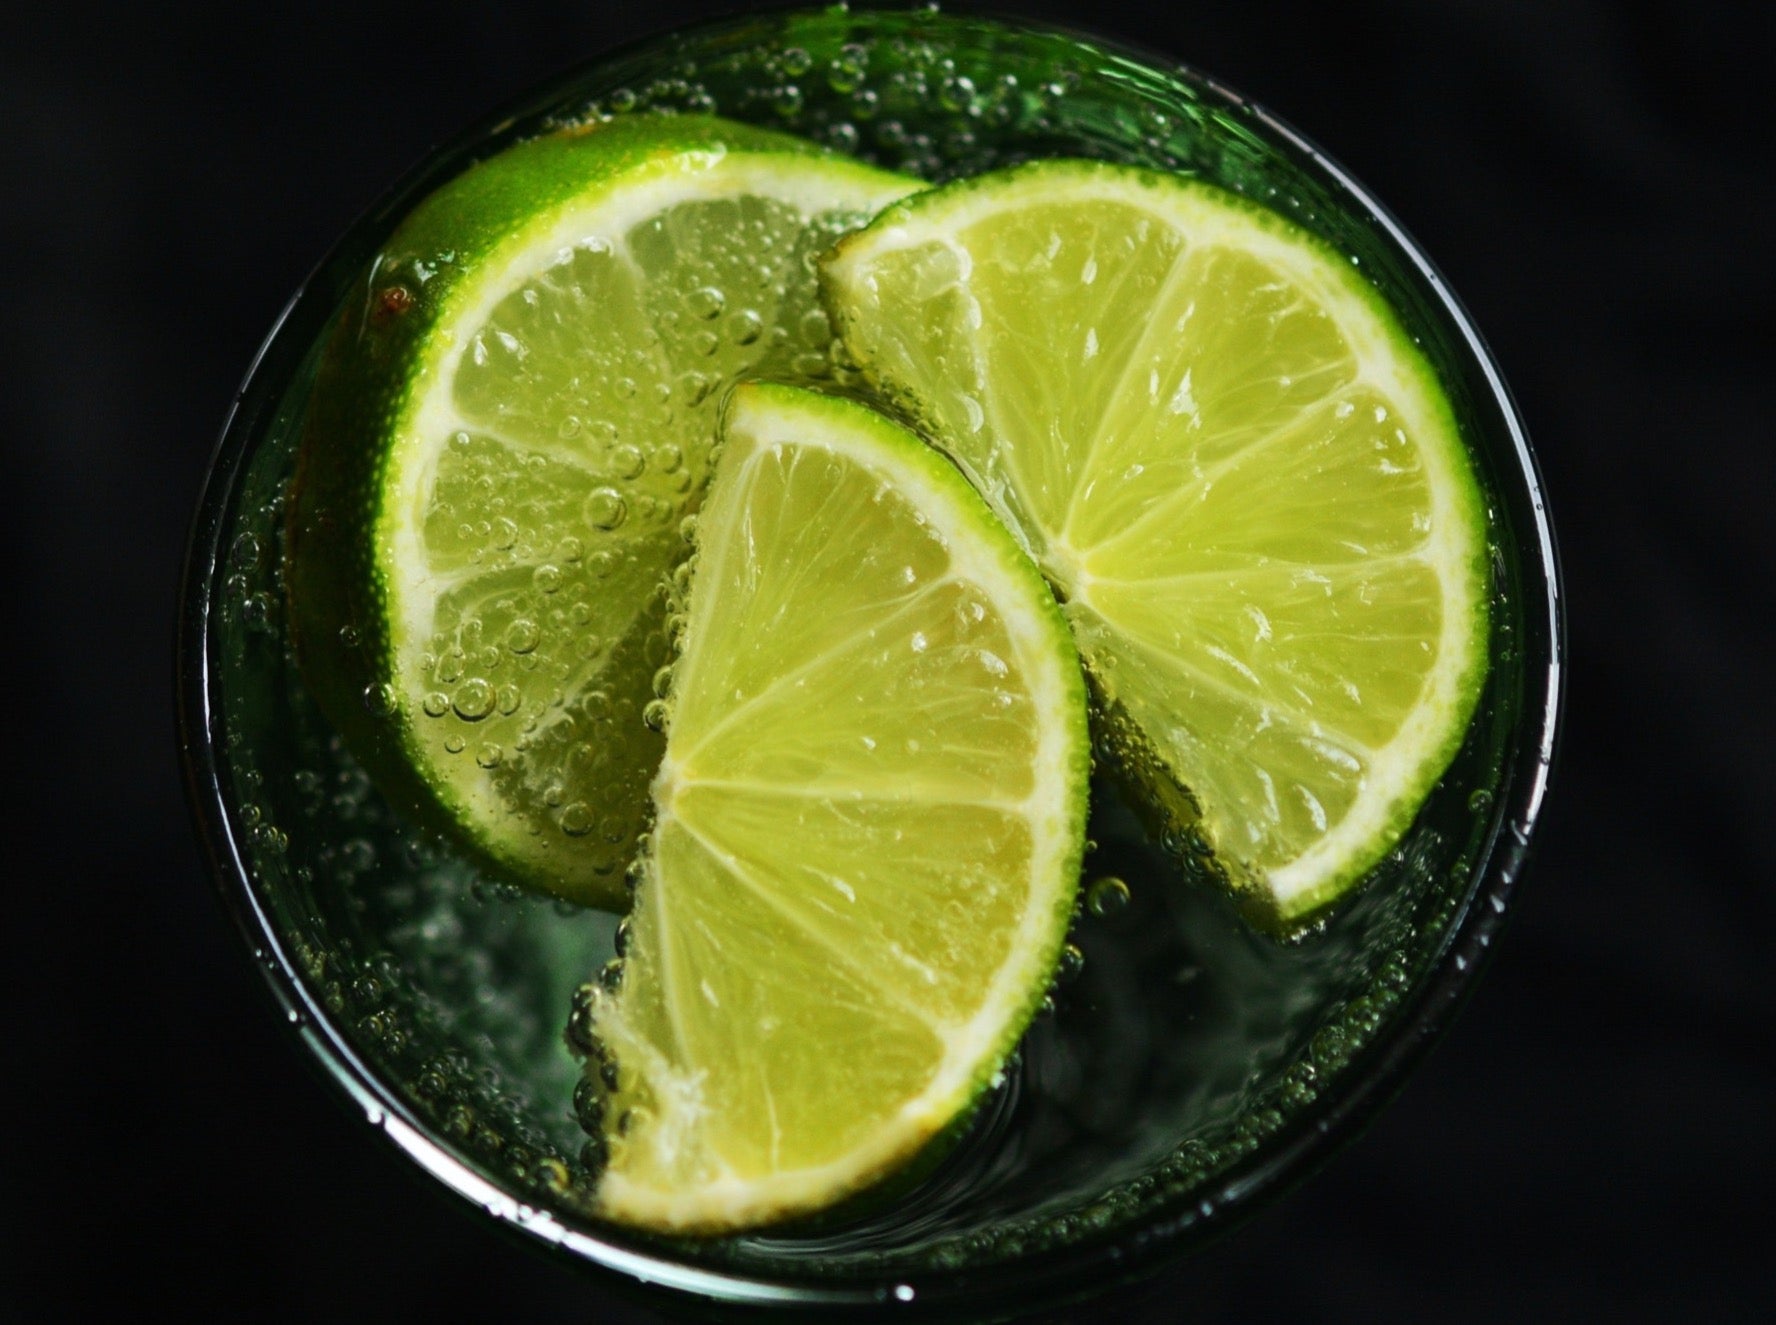 Lime slices floating in a glass of seltzer.